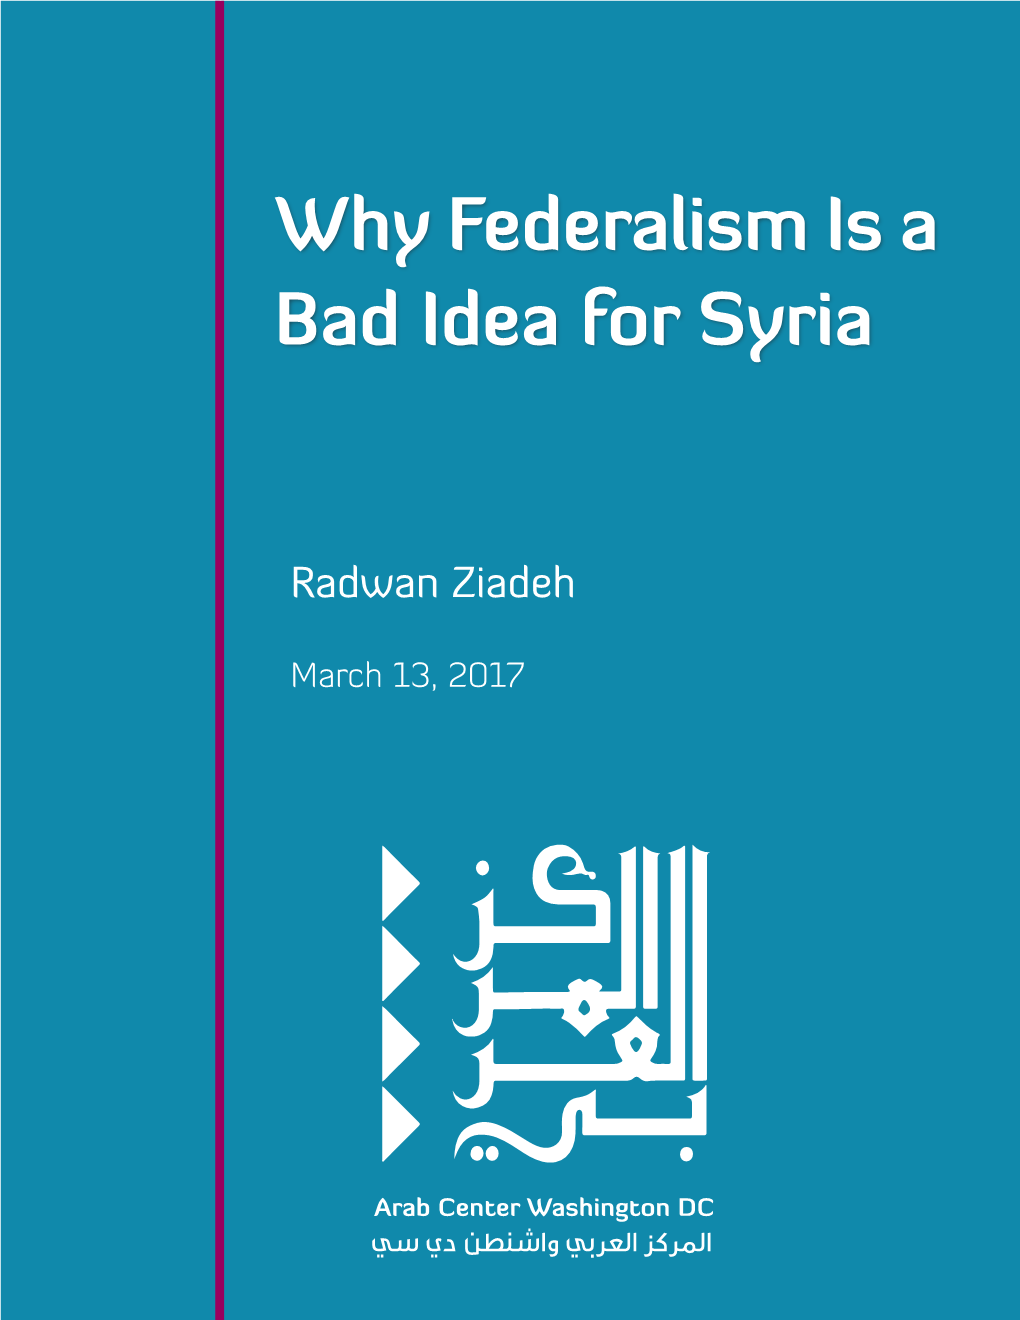 Why Federalism Is a Bad Idea for Syria